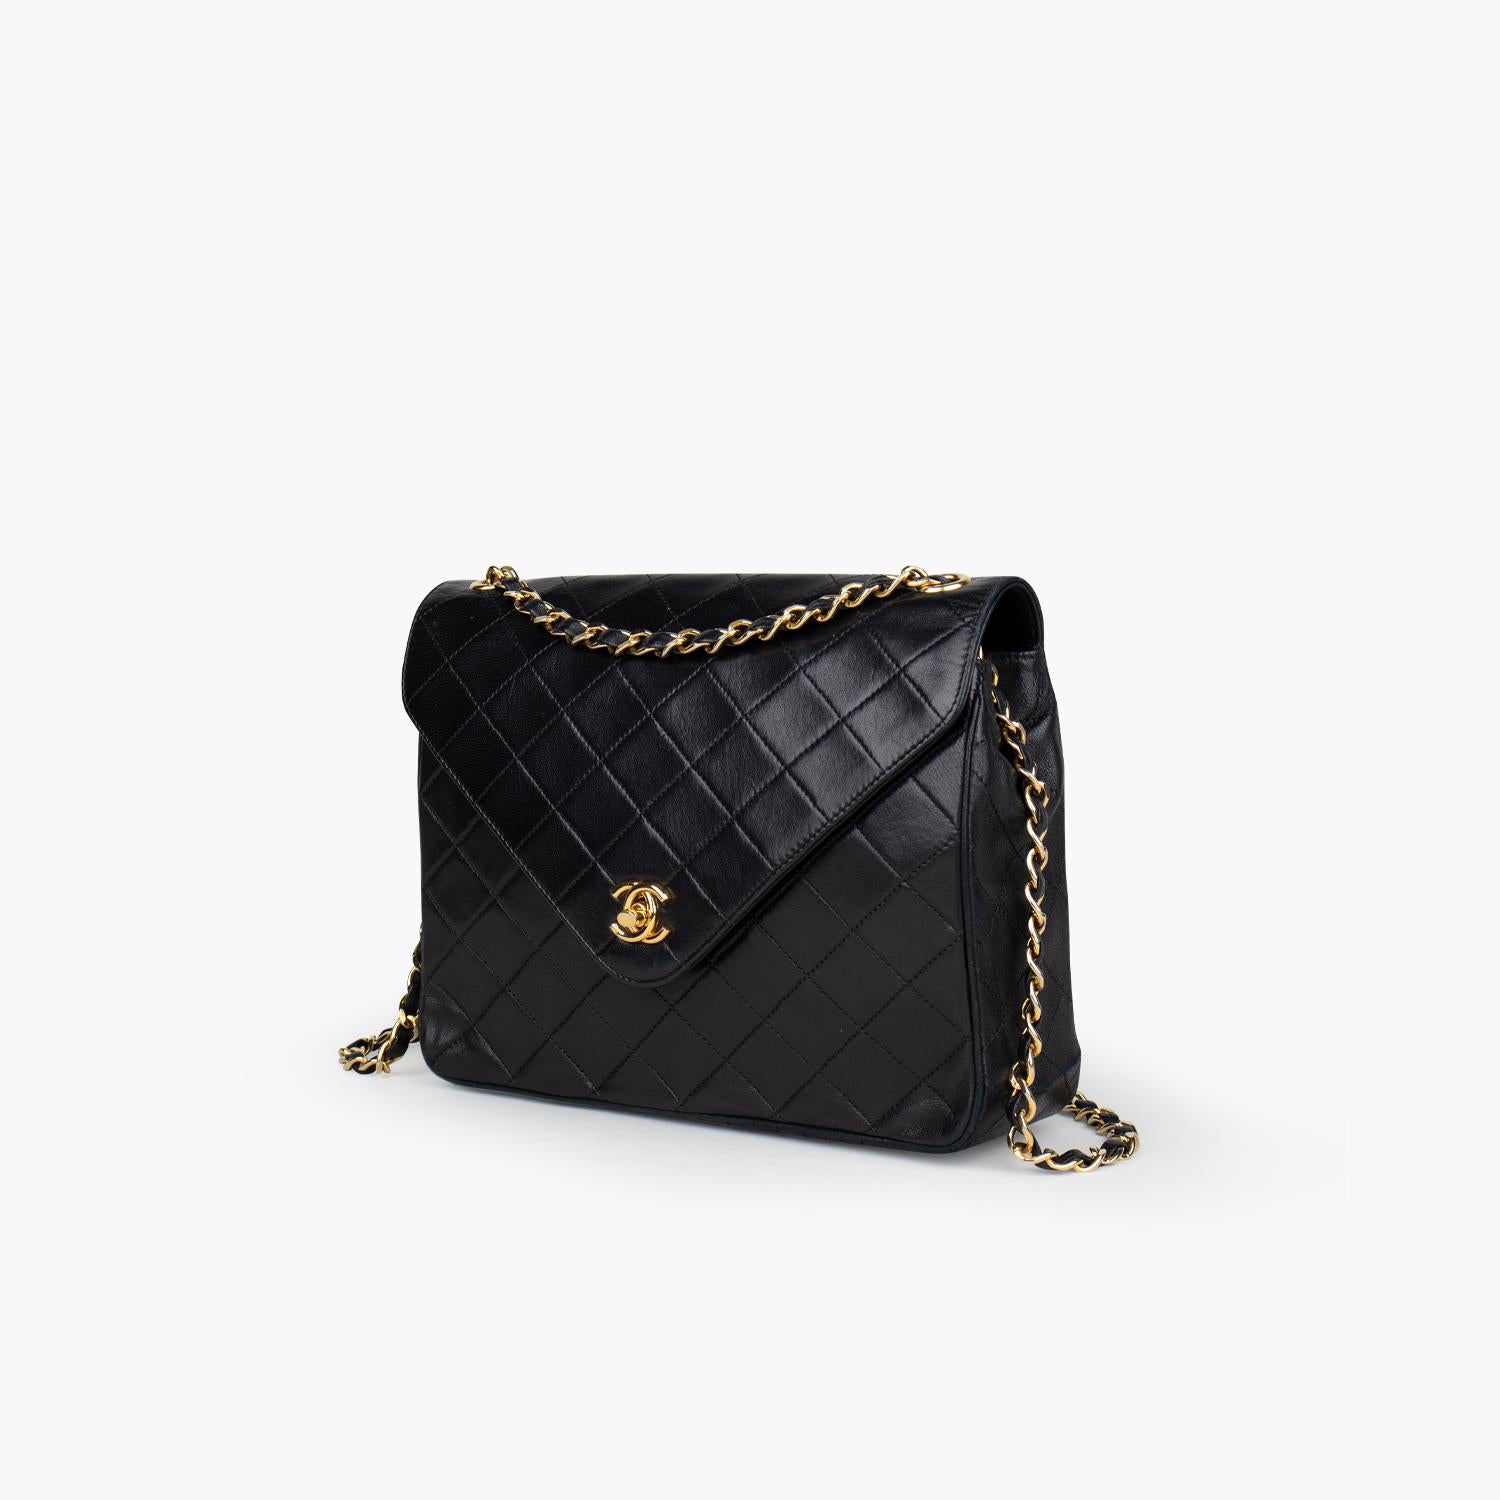 Black quilted leather vintage Chanel Small Classic Single Flap bag with

- Gold-hardware
- Single convertible chain-link and leather shoulder strap
- Burgundy leather lining, single zip pocket at interior wall, and interlocking 'CC' turn-lock